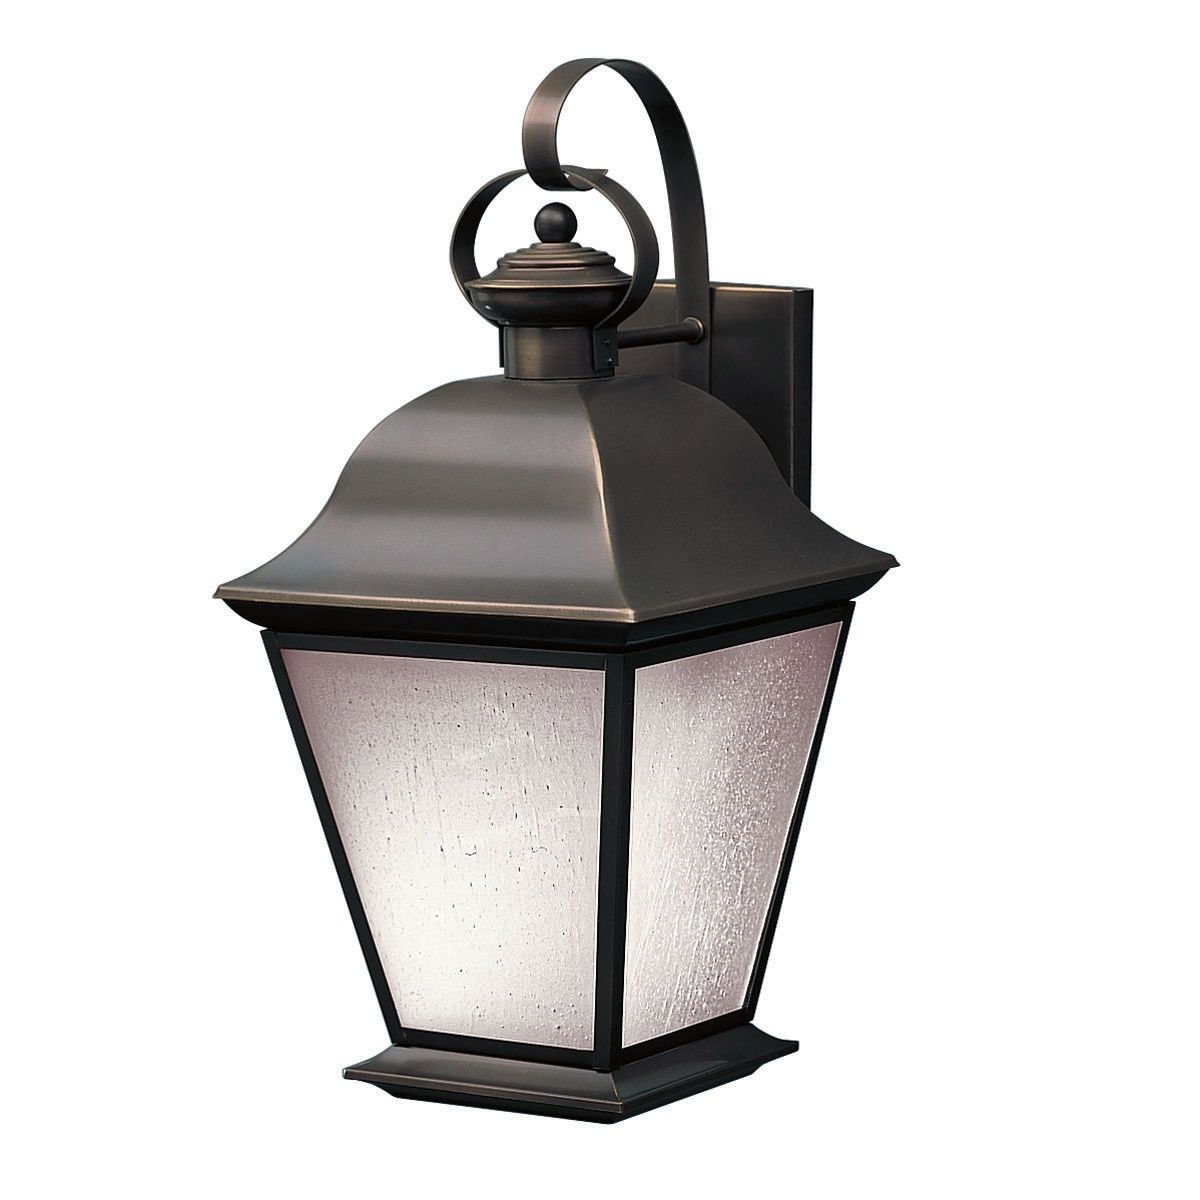 Wall Lights Design: Solar Wall Mounted Outdoor Lights In, Solar Throughout Wall Mounted Outdoor Lanterns (View 7 of 20)